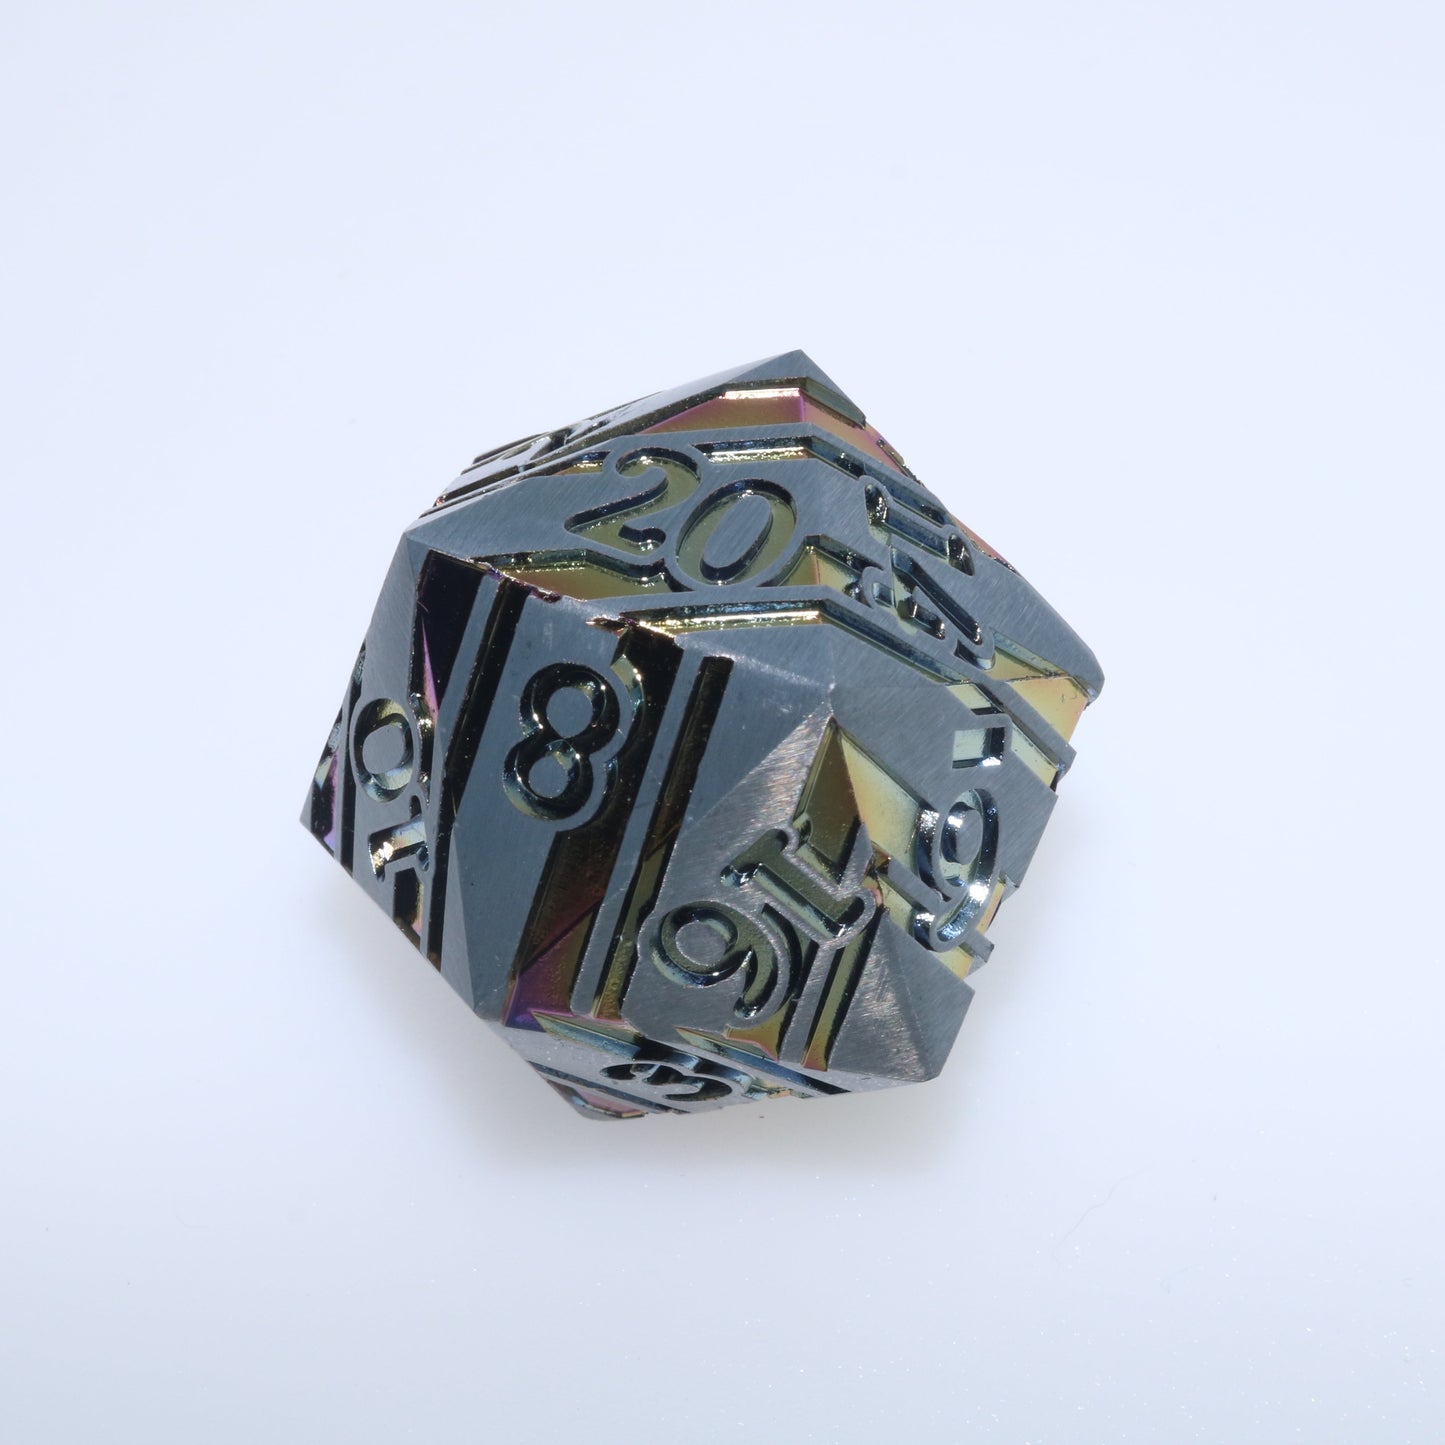 Oversized Etched Prism d20 Dice